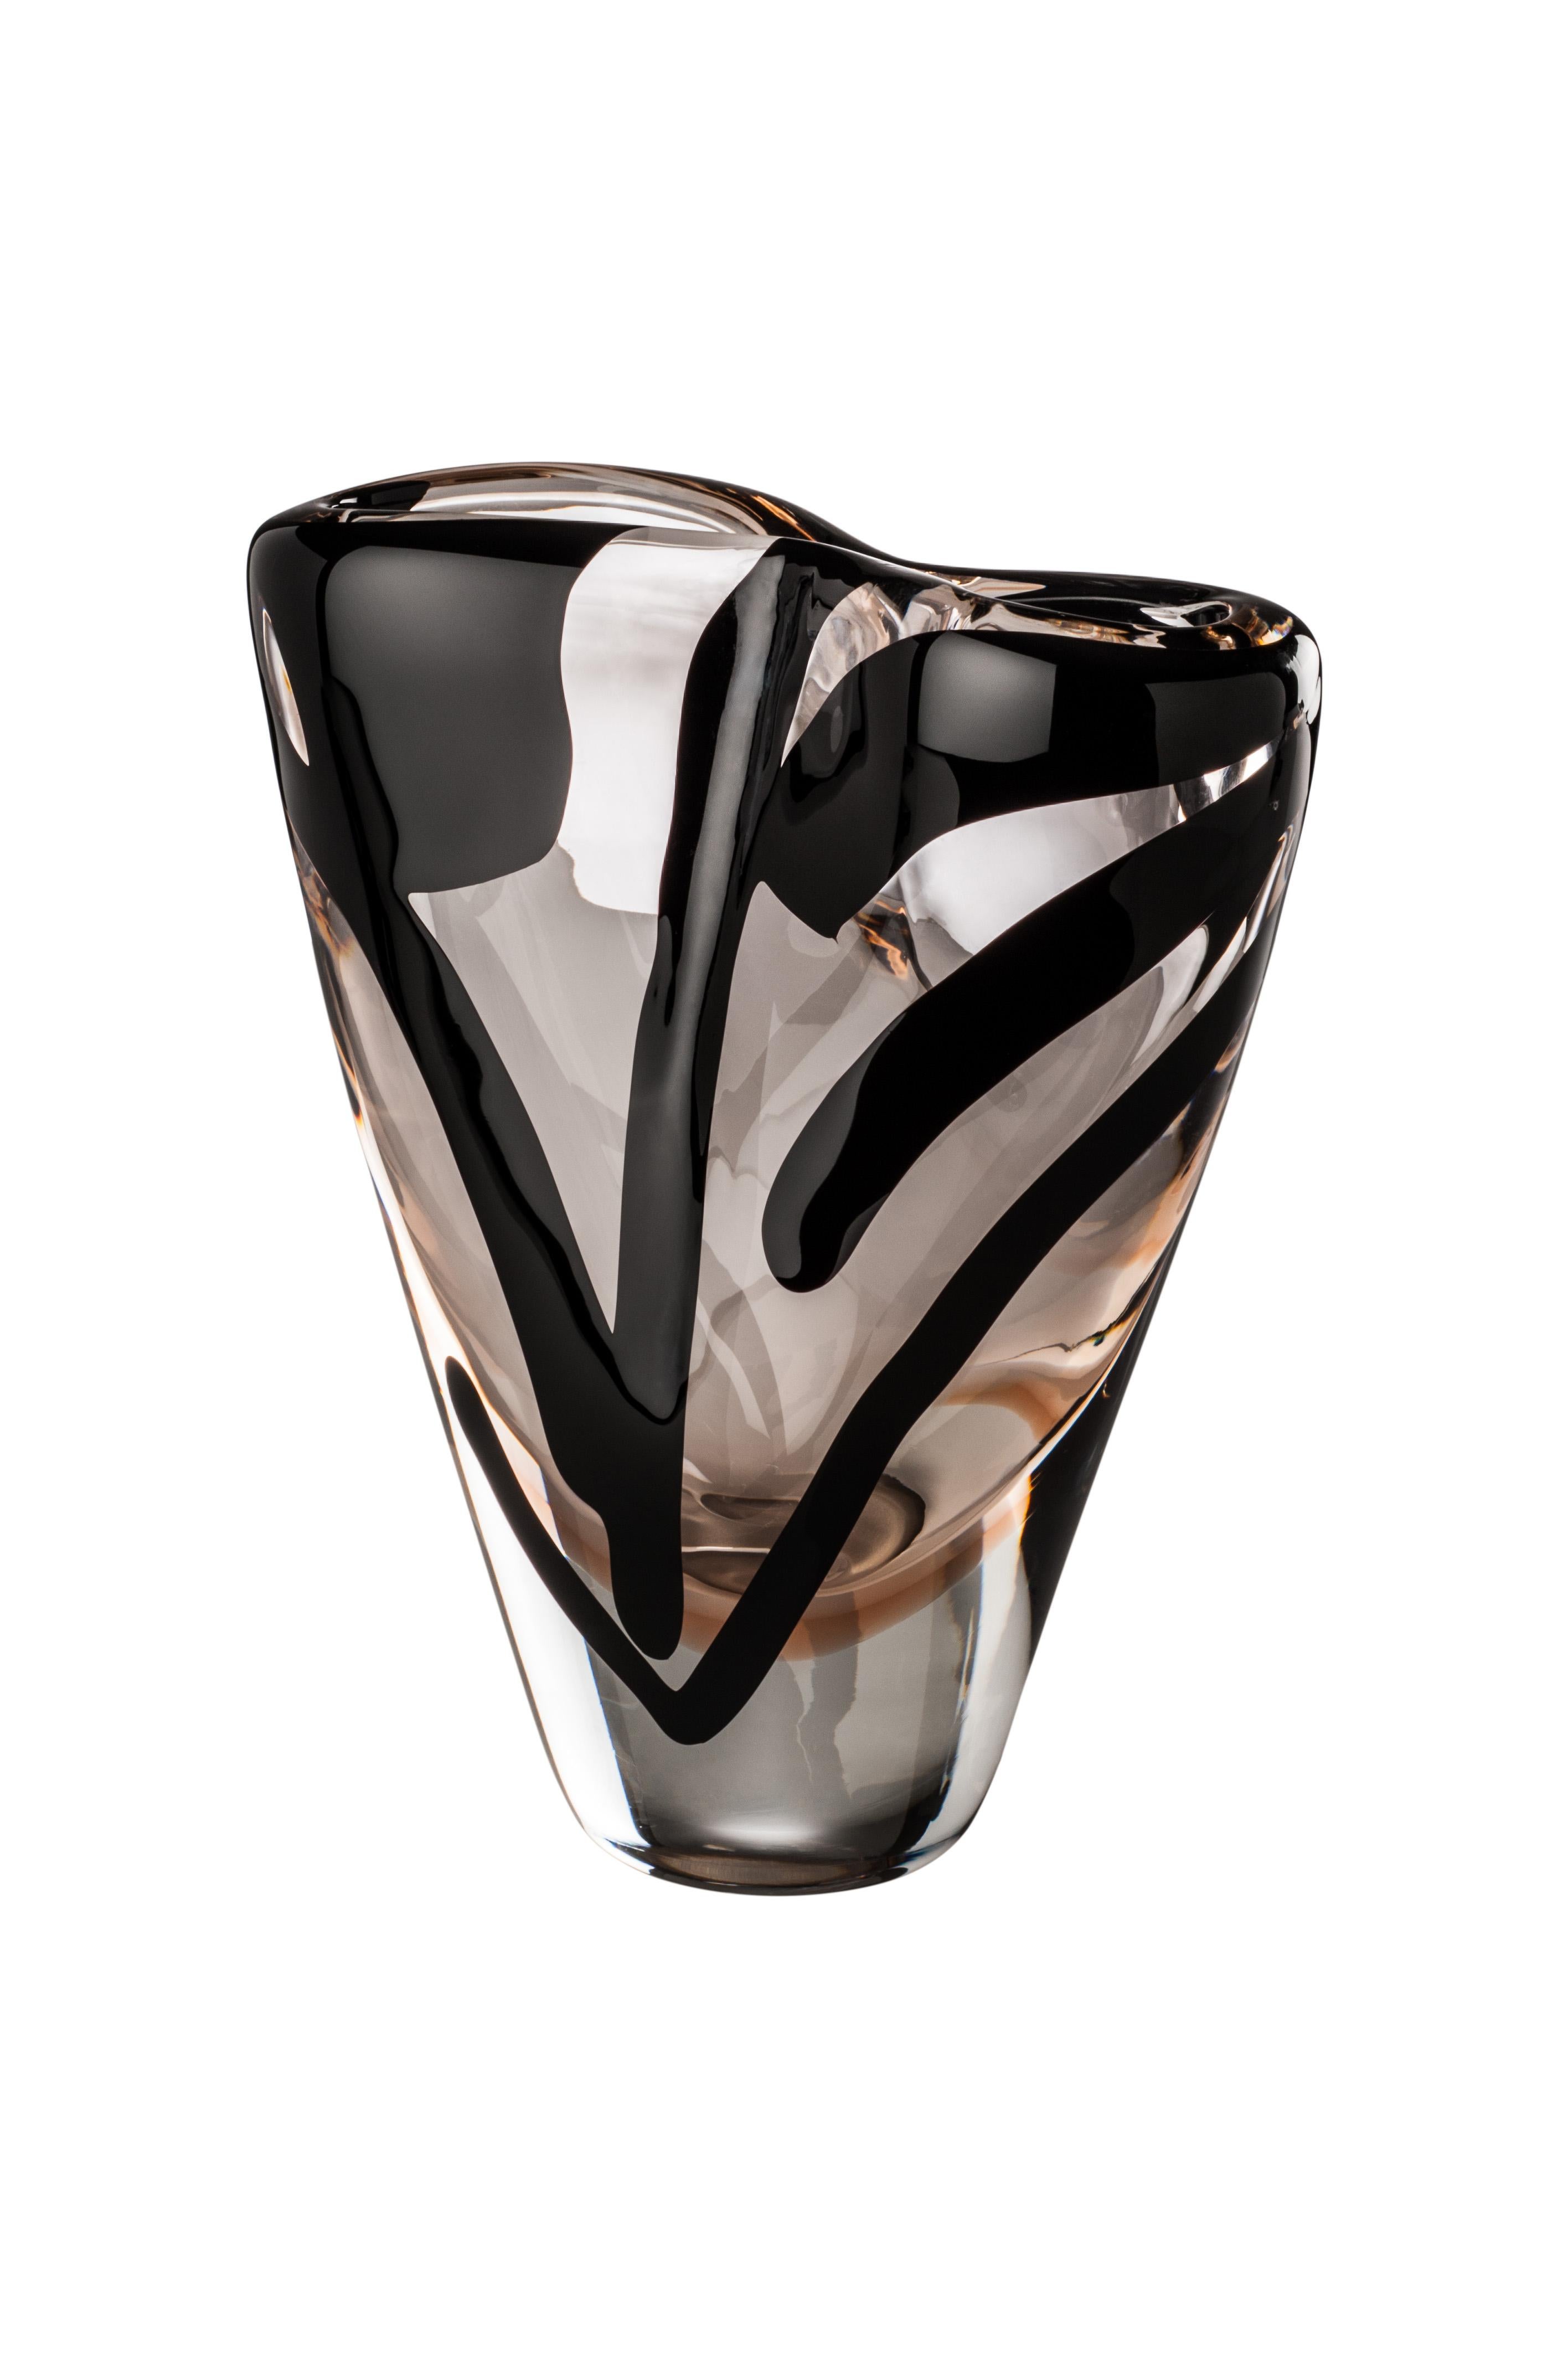 Venini glass vase in crystal and light pink with black decoration designed by Peter Marino in 2017. Perfect for indoor home decor as container or statement piece for any room. Also available in other colors on 1stdibs. Limited edition of only 349